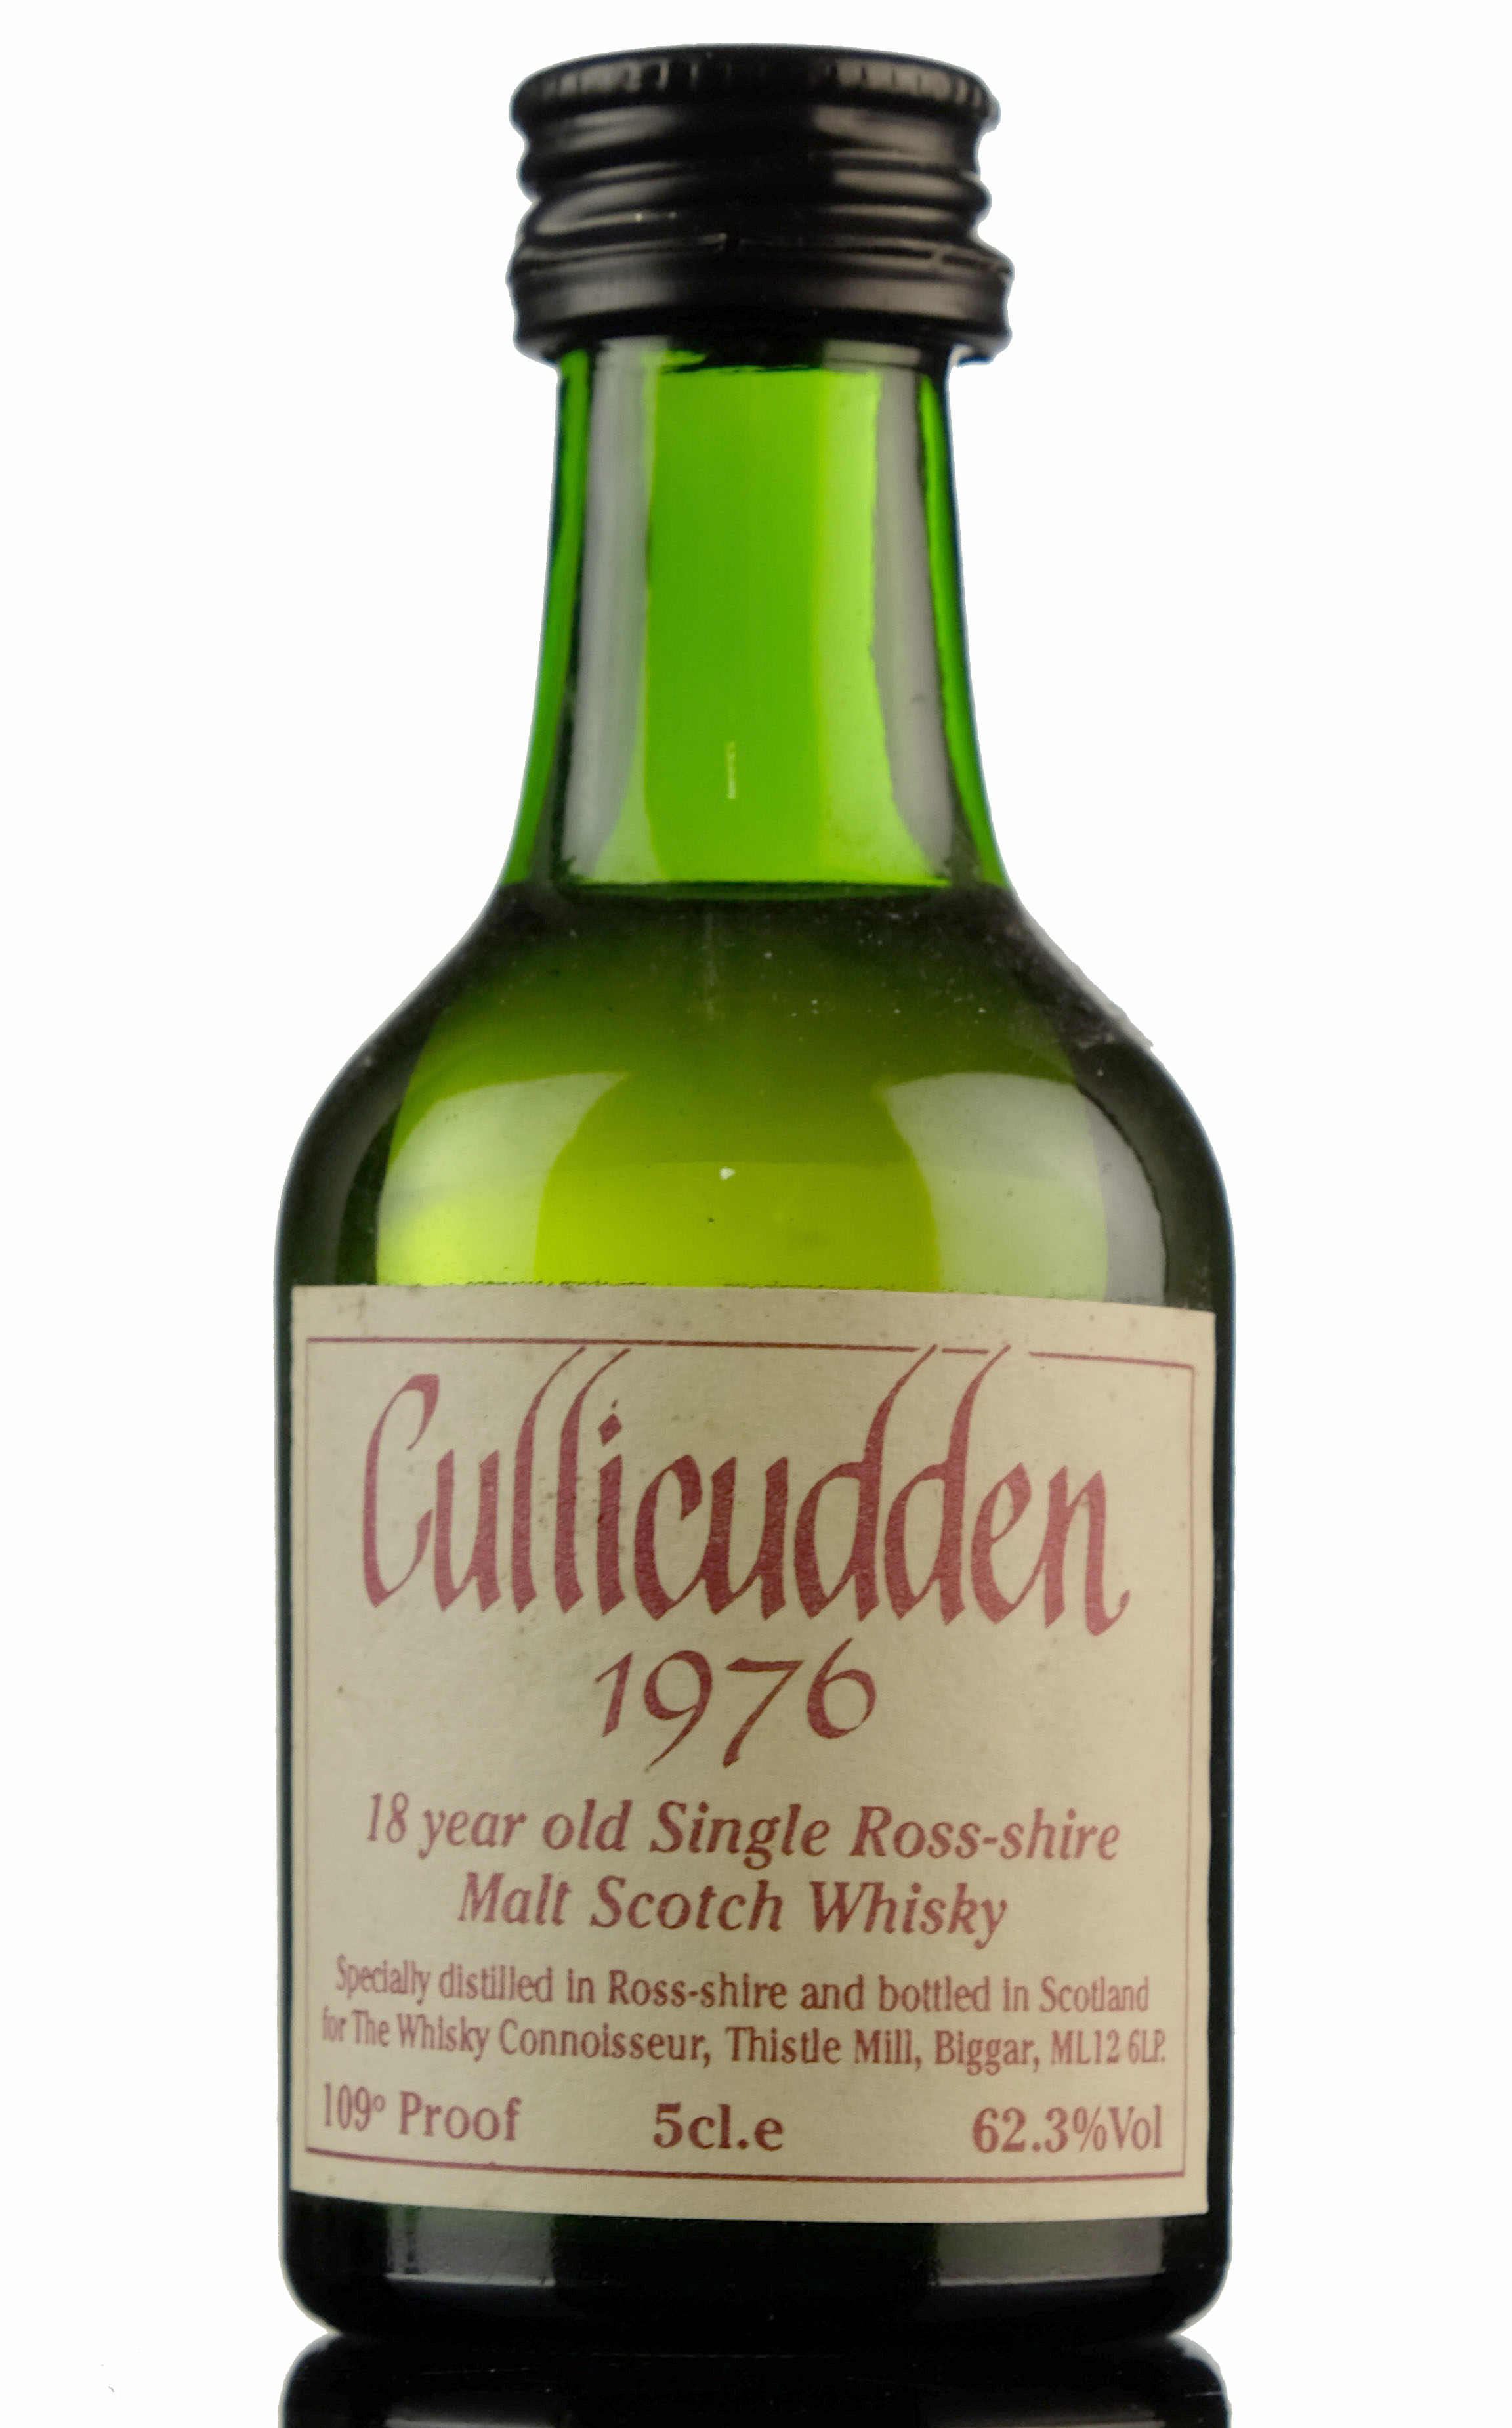 Cullicudden (Dalmore) 1976 - 18 Year Old - Whisky Connoisseur - Miniature